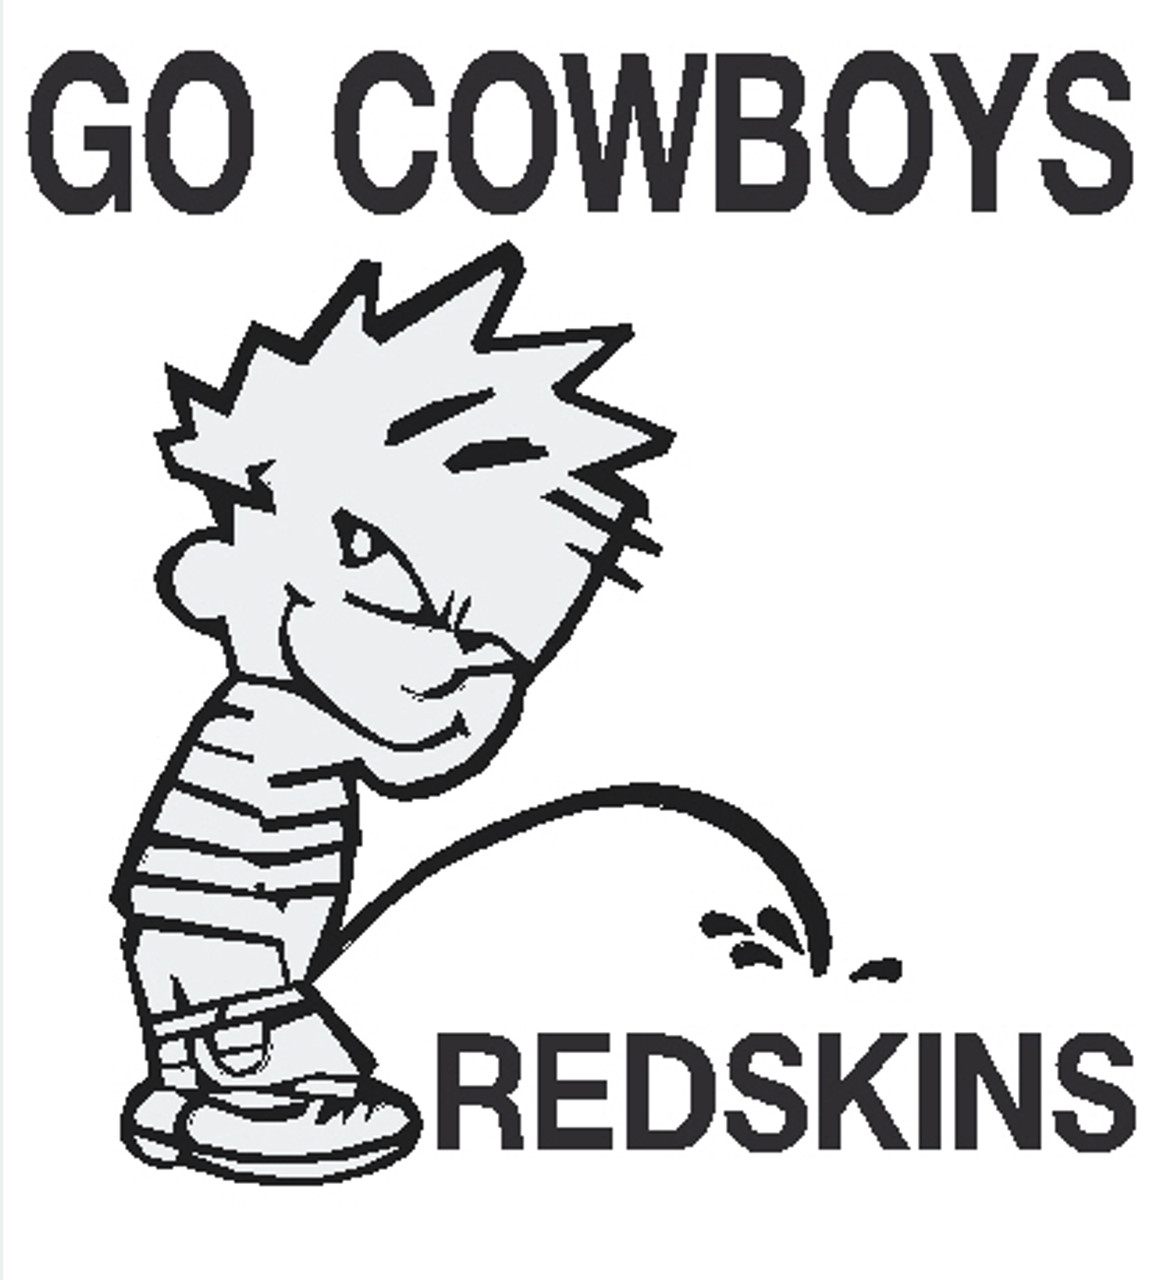 Cowboys Piss On Redskins Decal